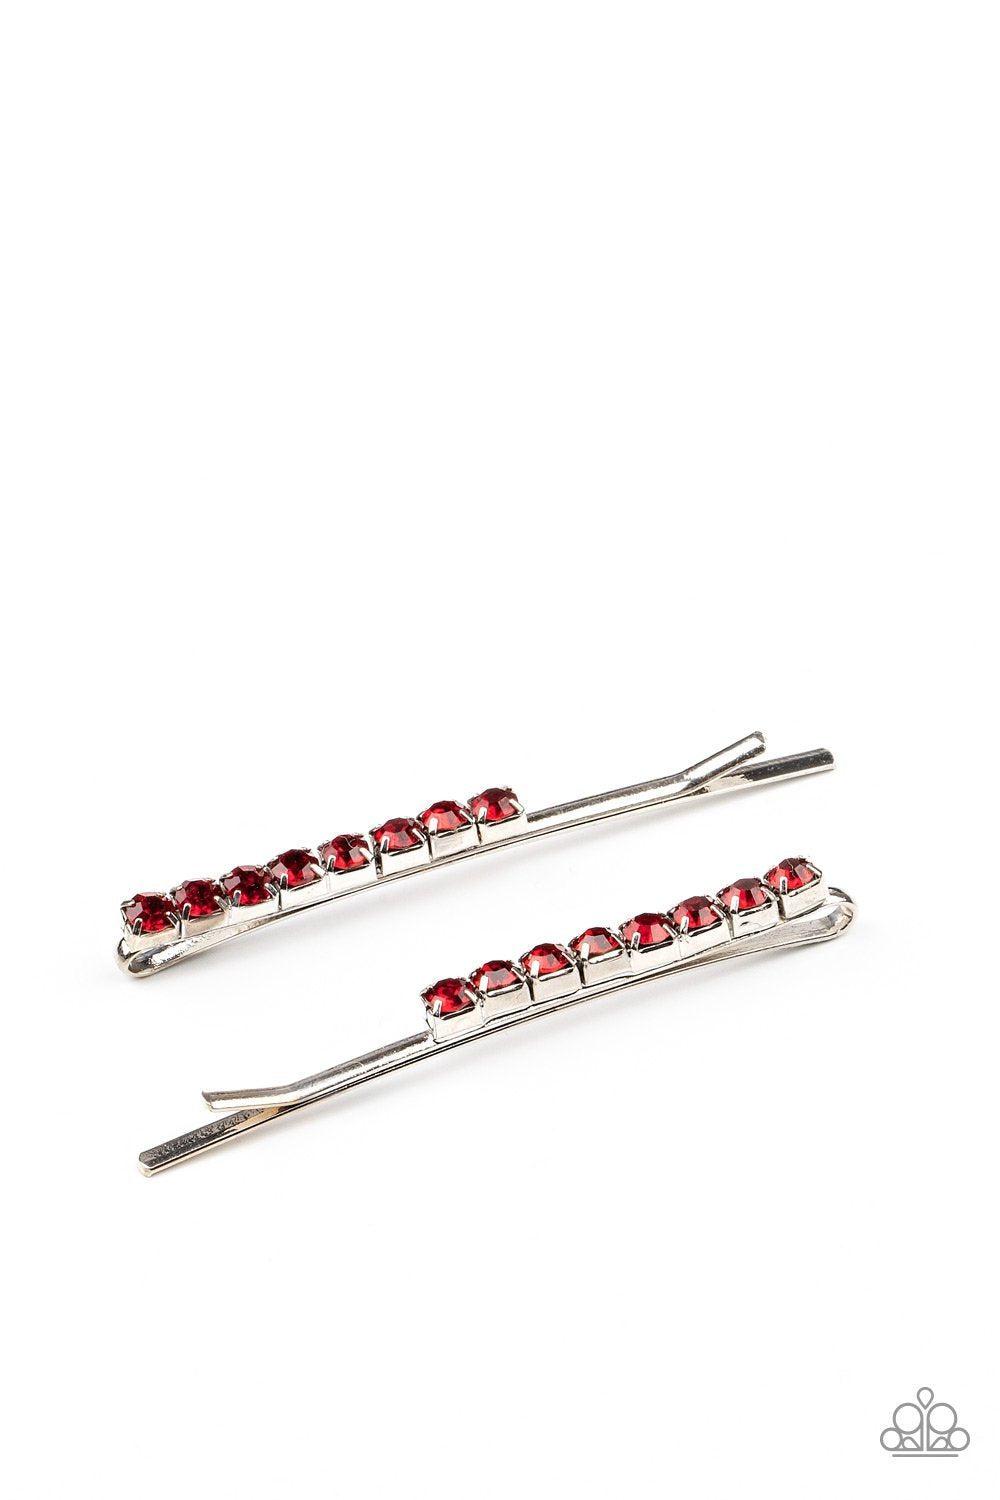 Satisfactory Sparkle Red Rhinestone Hair Pins - Paparazzi Accessories - lightbox -CarasShop.com - $5 Jewelry by Cara Jewels